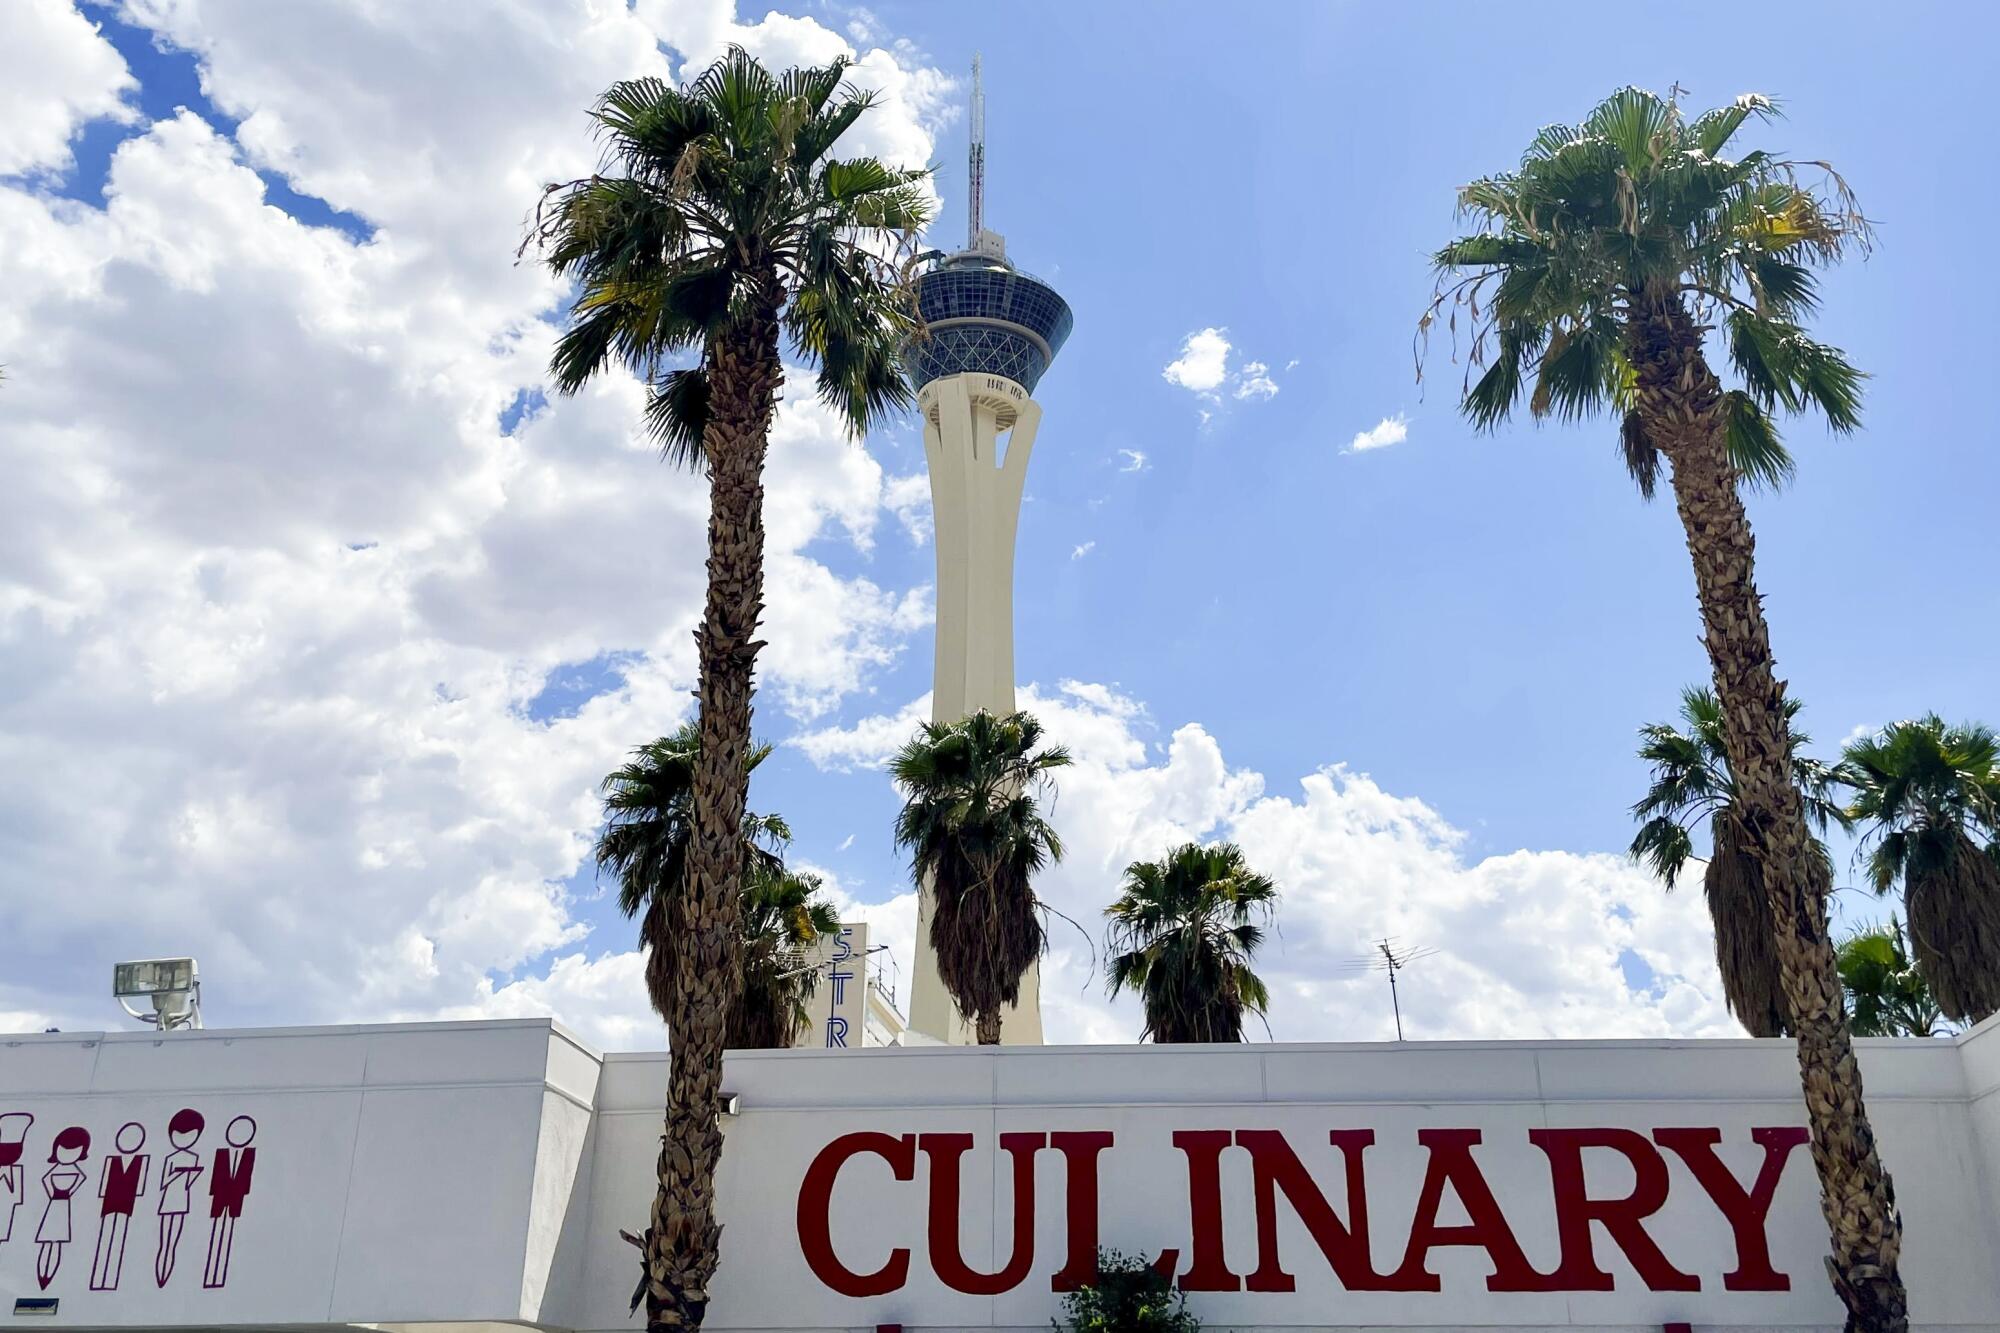 A view from below of palm trees and the top of a white building reading "Culinary," with a tall observation tower behind it